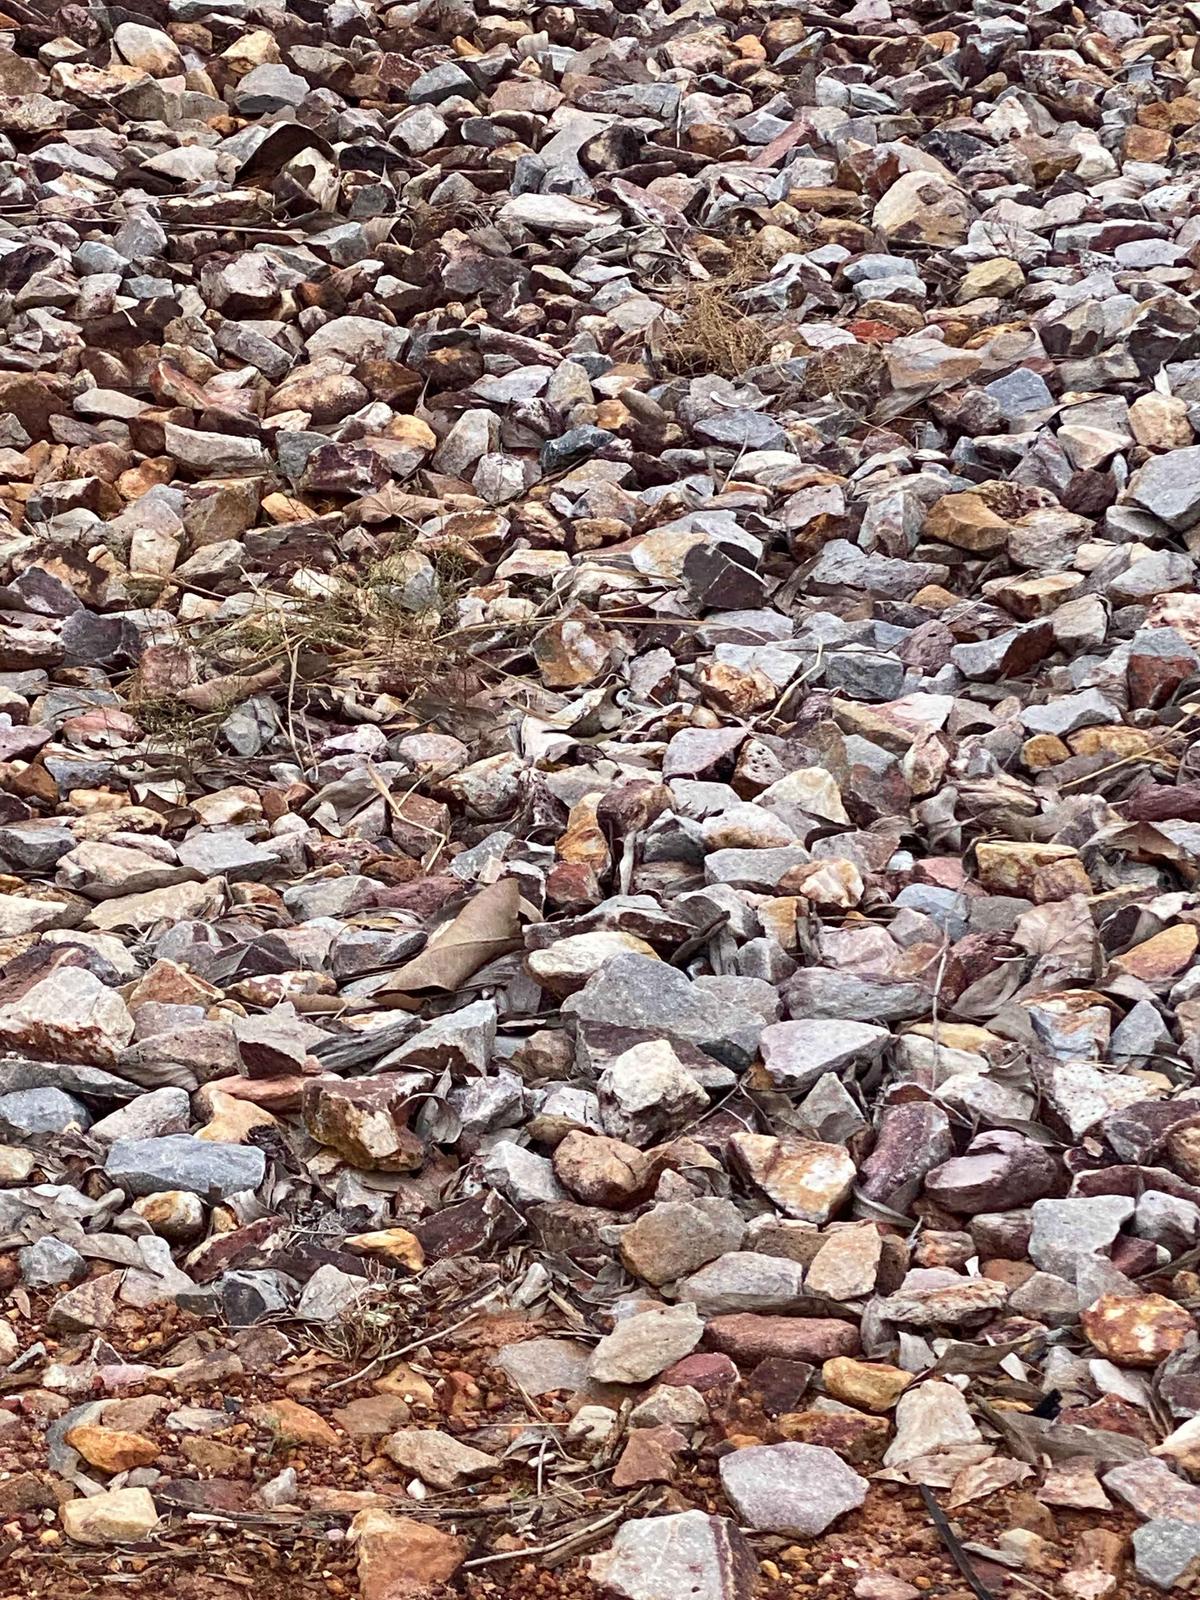 A finch hiding among the rocks. (Courtesy of Caters News)